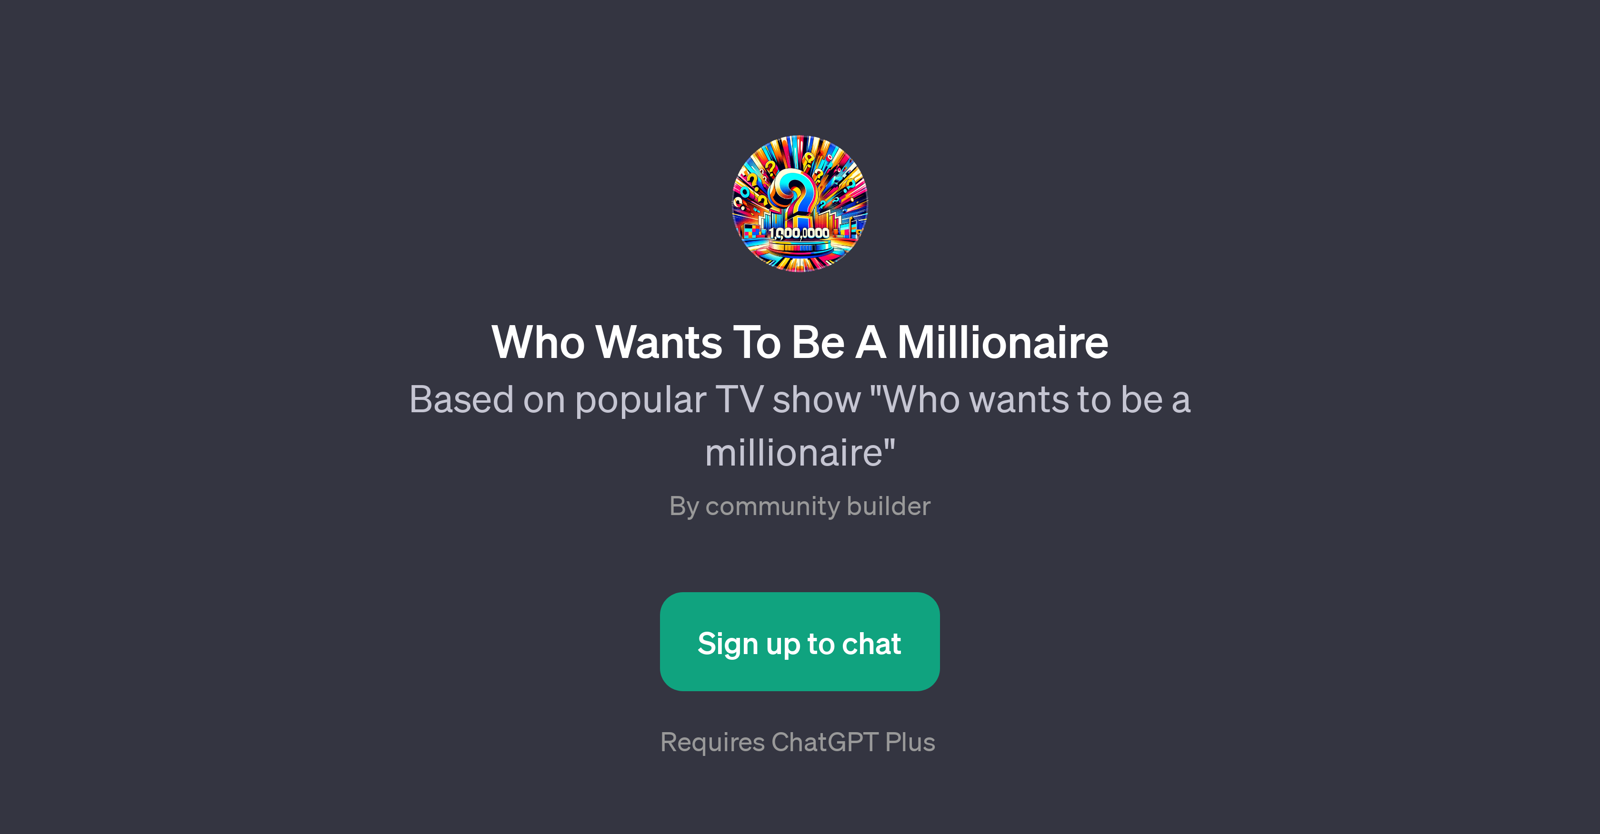 Who Wants To Be A Millionaire website